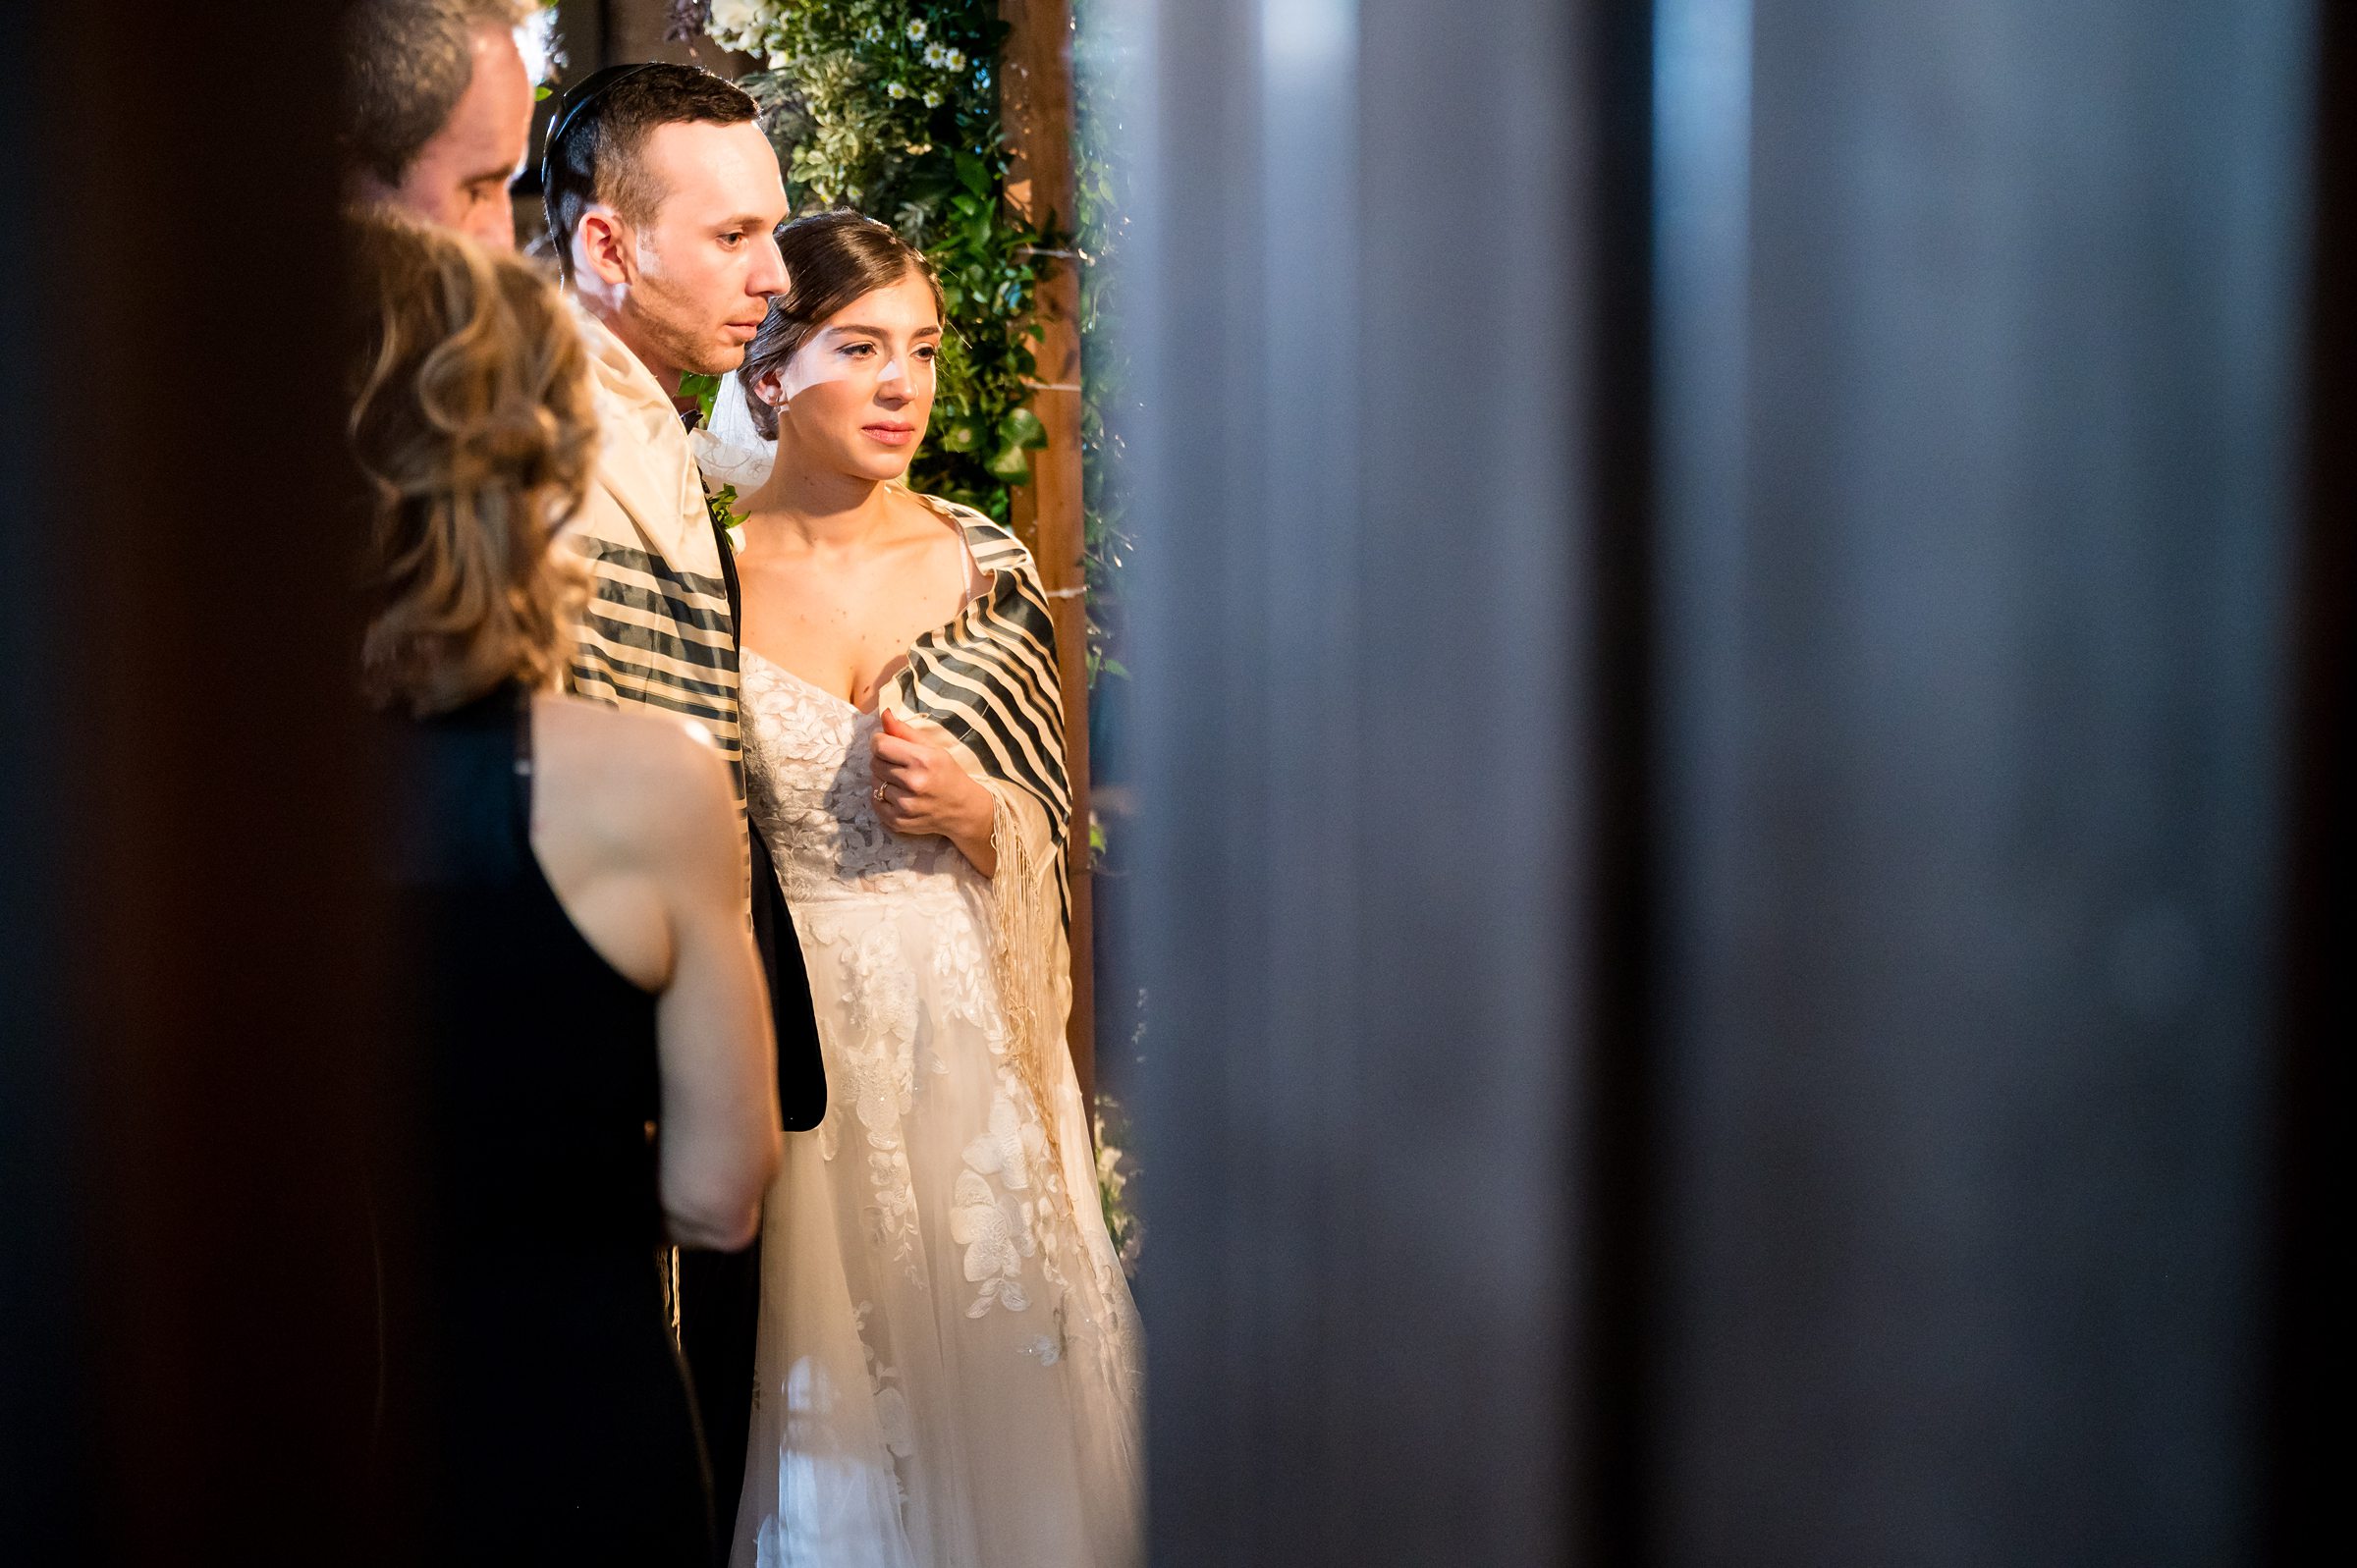 A bride and groom gazing at each other lovingly through a glass door at their Lilah Events wedding.